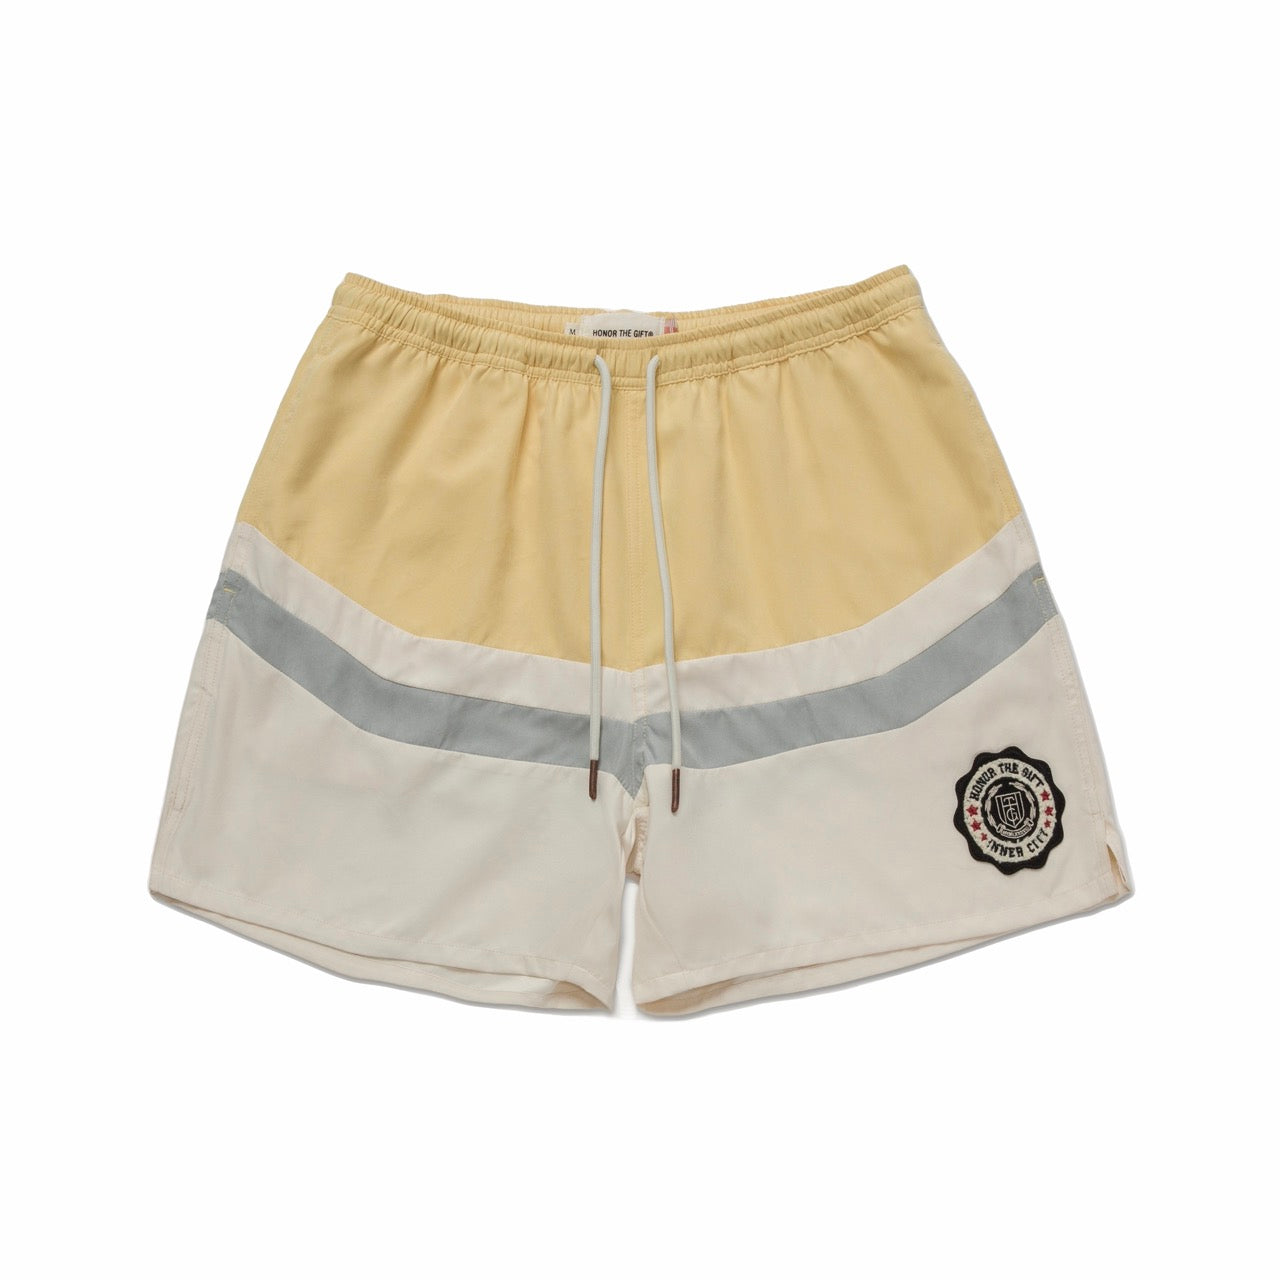 Honor The Gift Brushed Poly Track Short